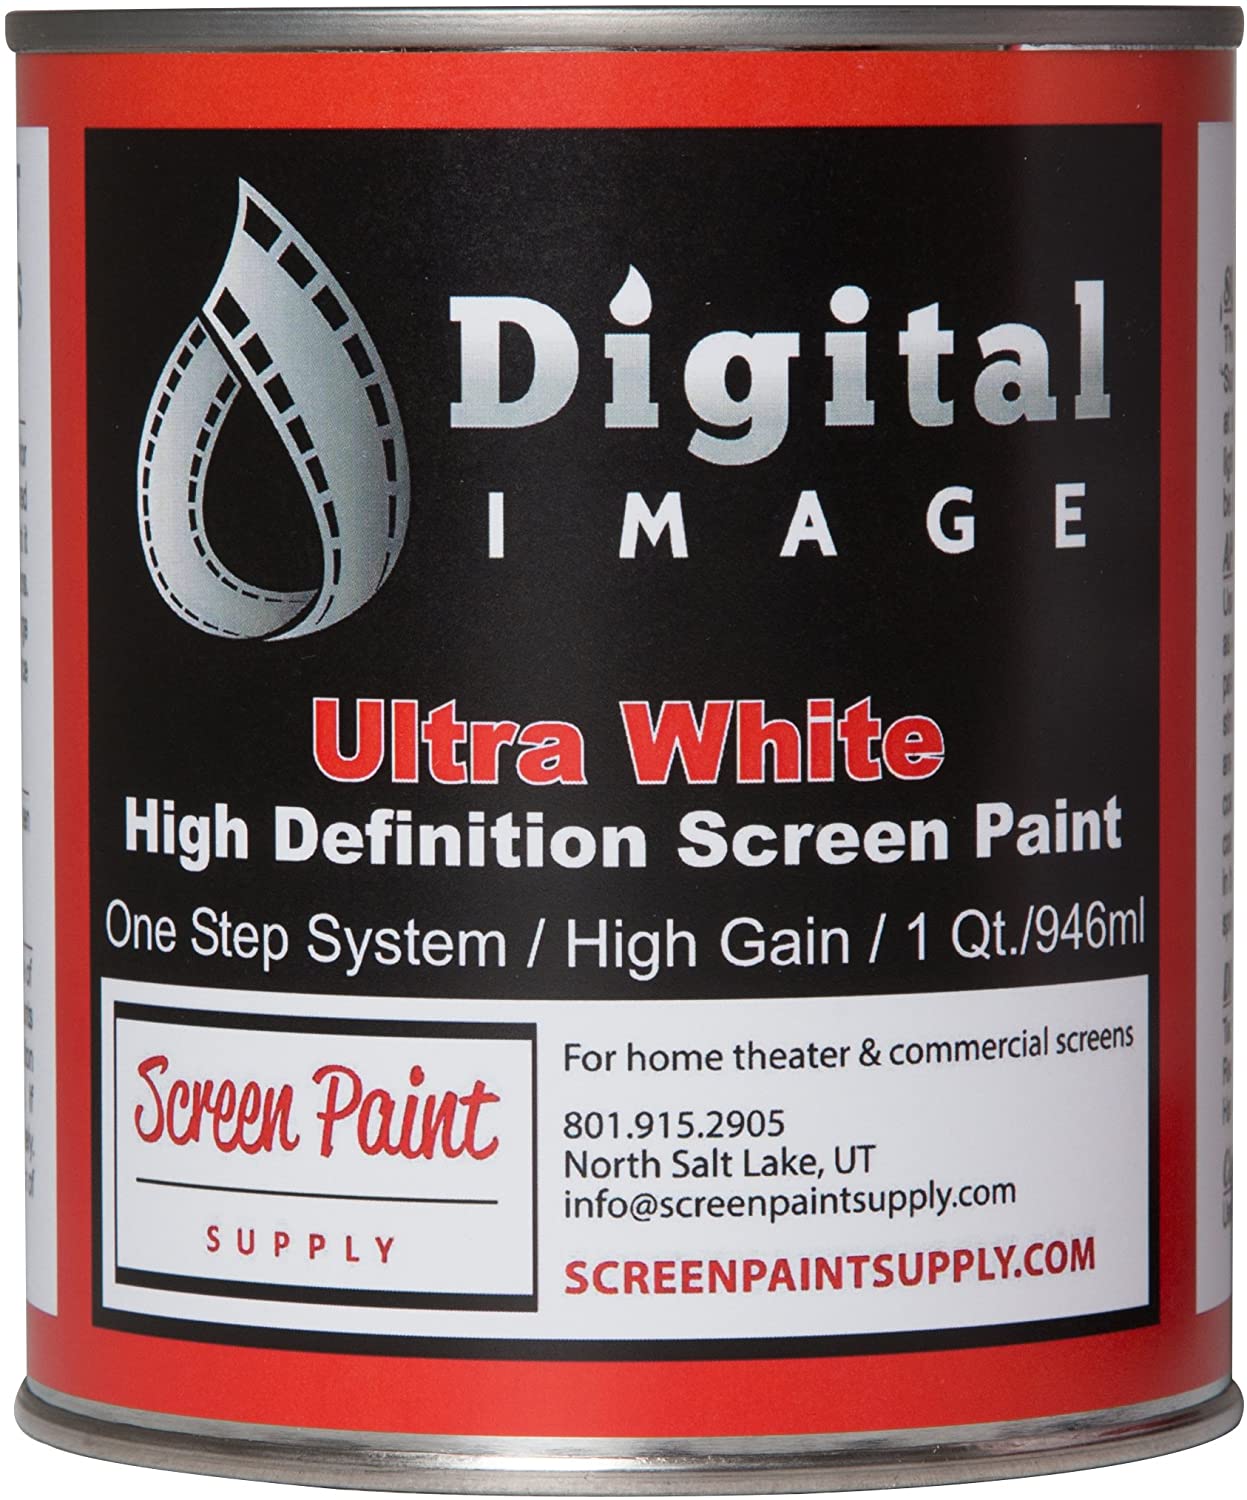 Projector Screen Paint - High Definition 4K - Ultra White review